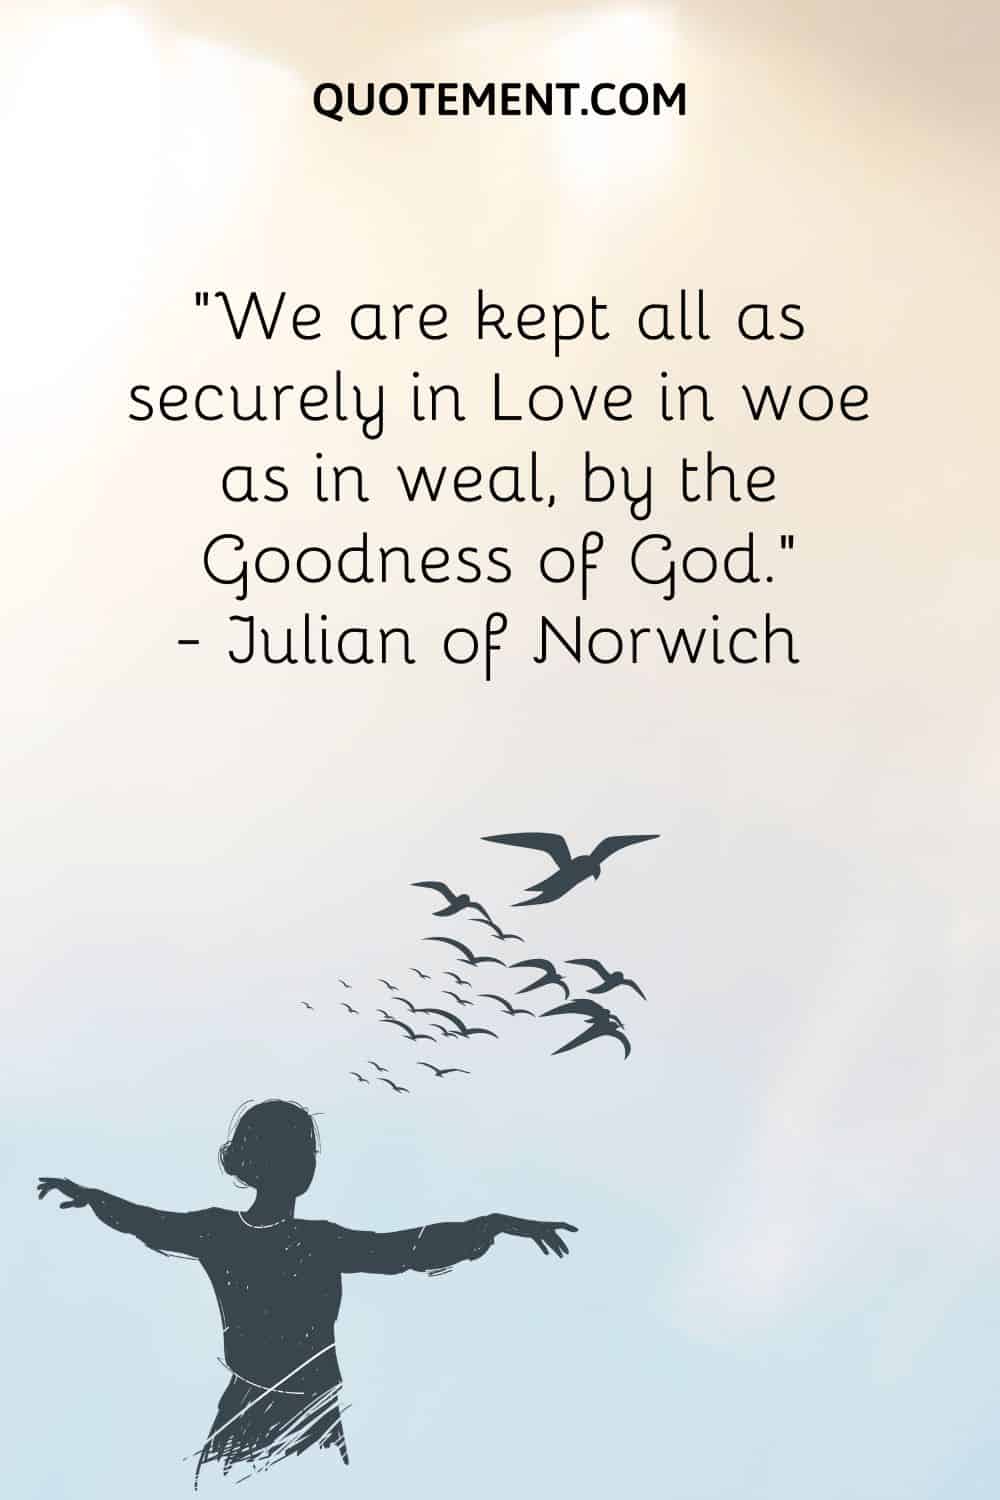 “We are kept all as securely in Love in woe as in weal, by the Goodness of God.” — Julian of Norwich